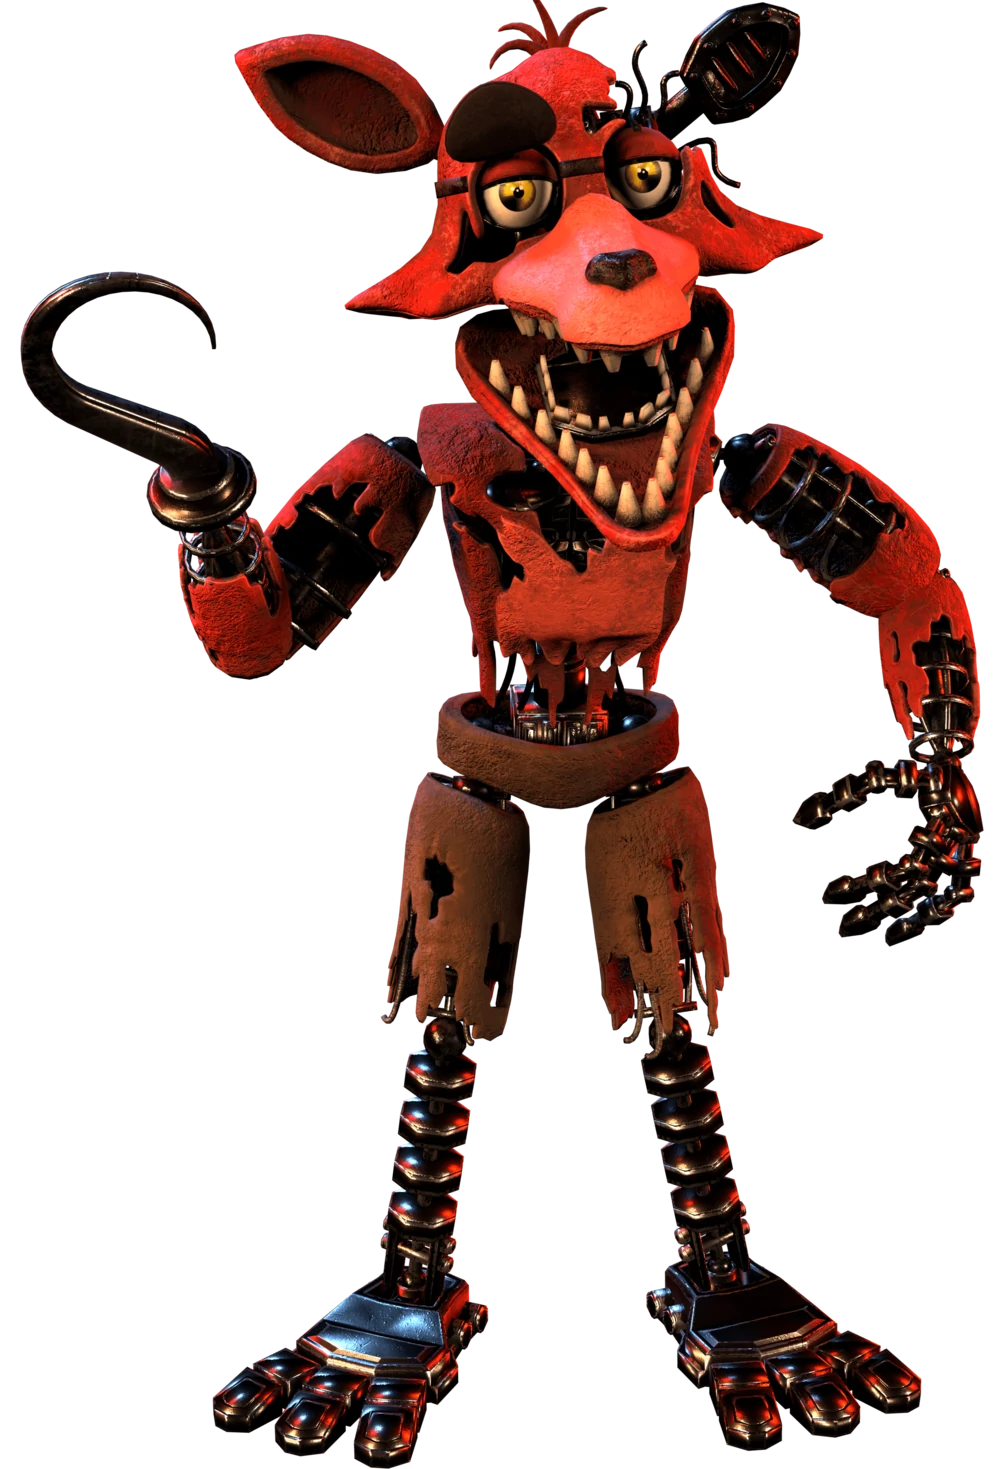 Shadow Freddy (Canon)/Sans2345, Character Stats and Profiles Wiki